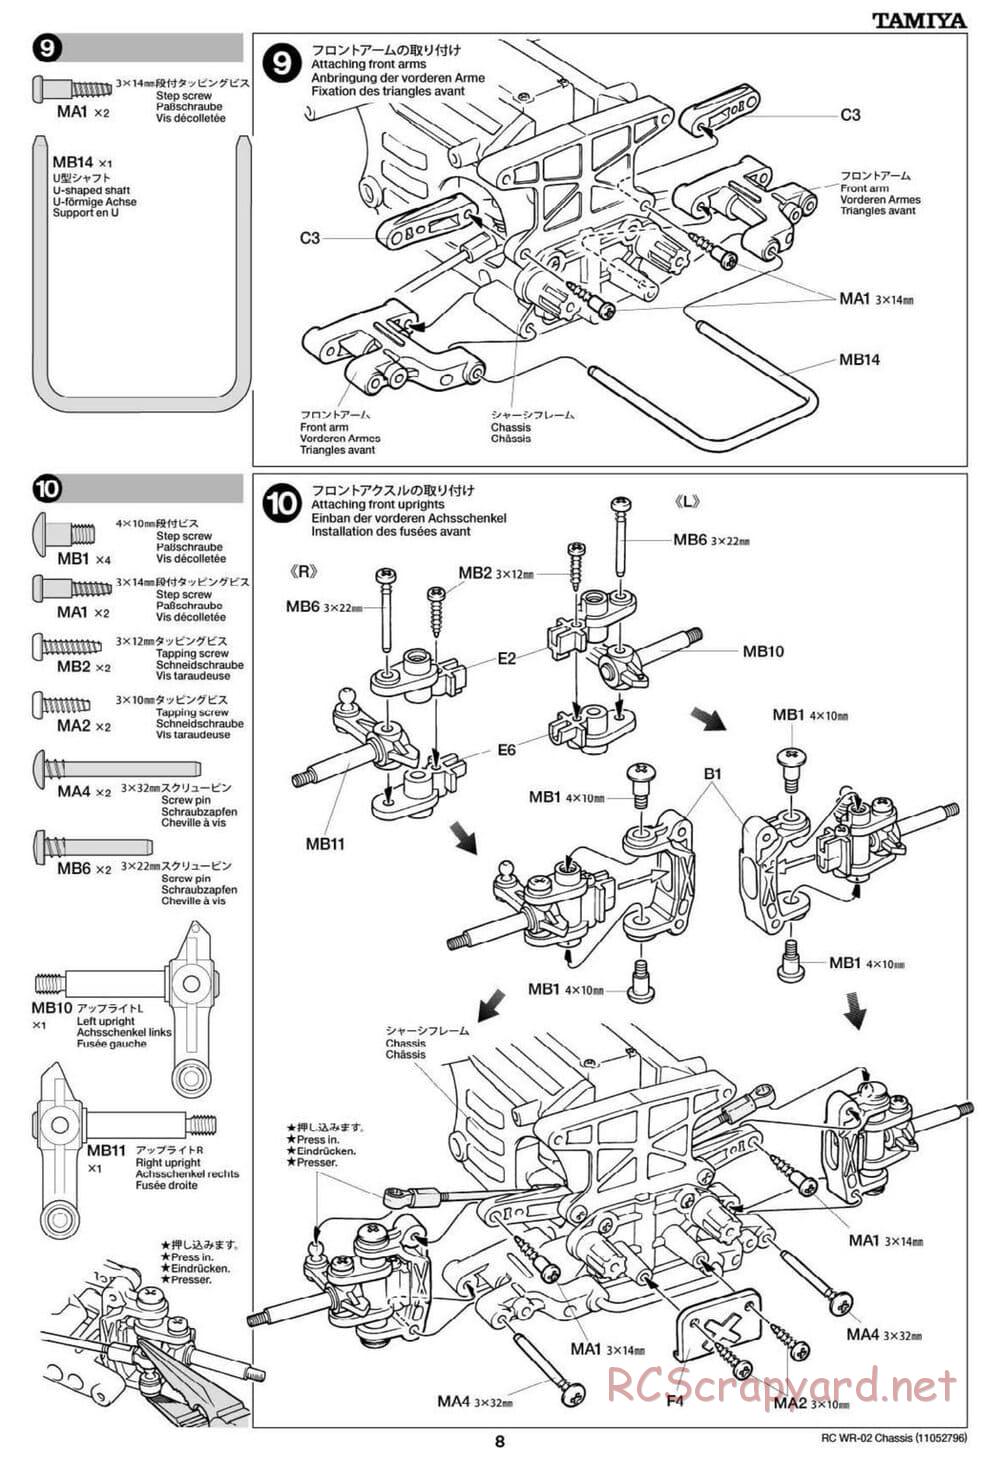 Tamiya - VW Type 2 Wheelie (T1) - WR-02 Chassis - Manual - Page 8